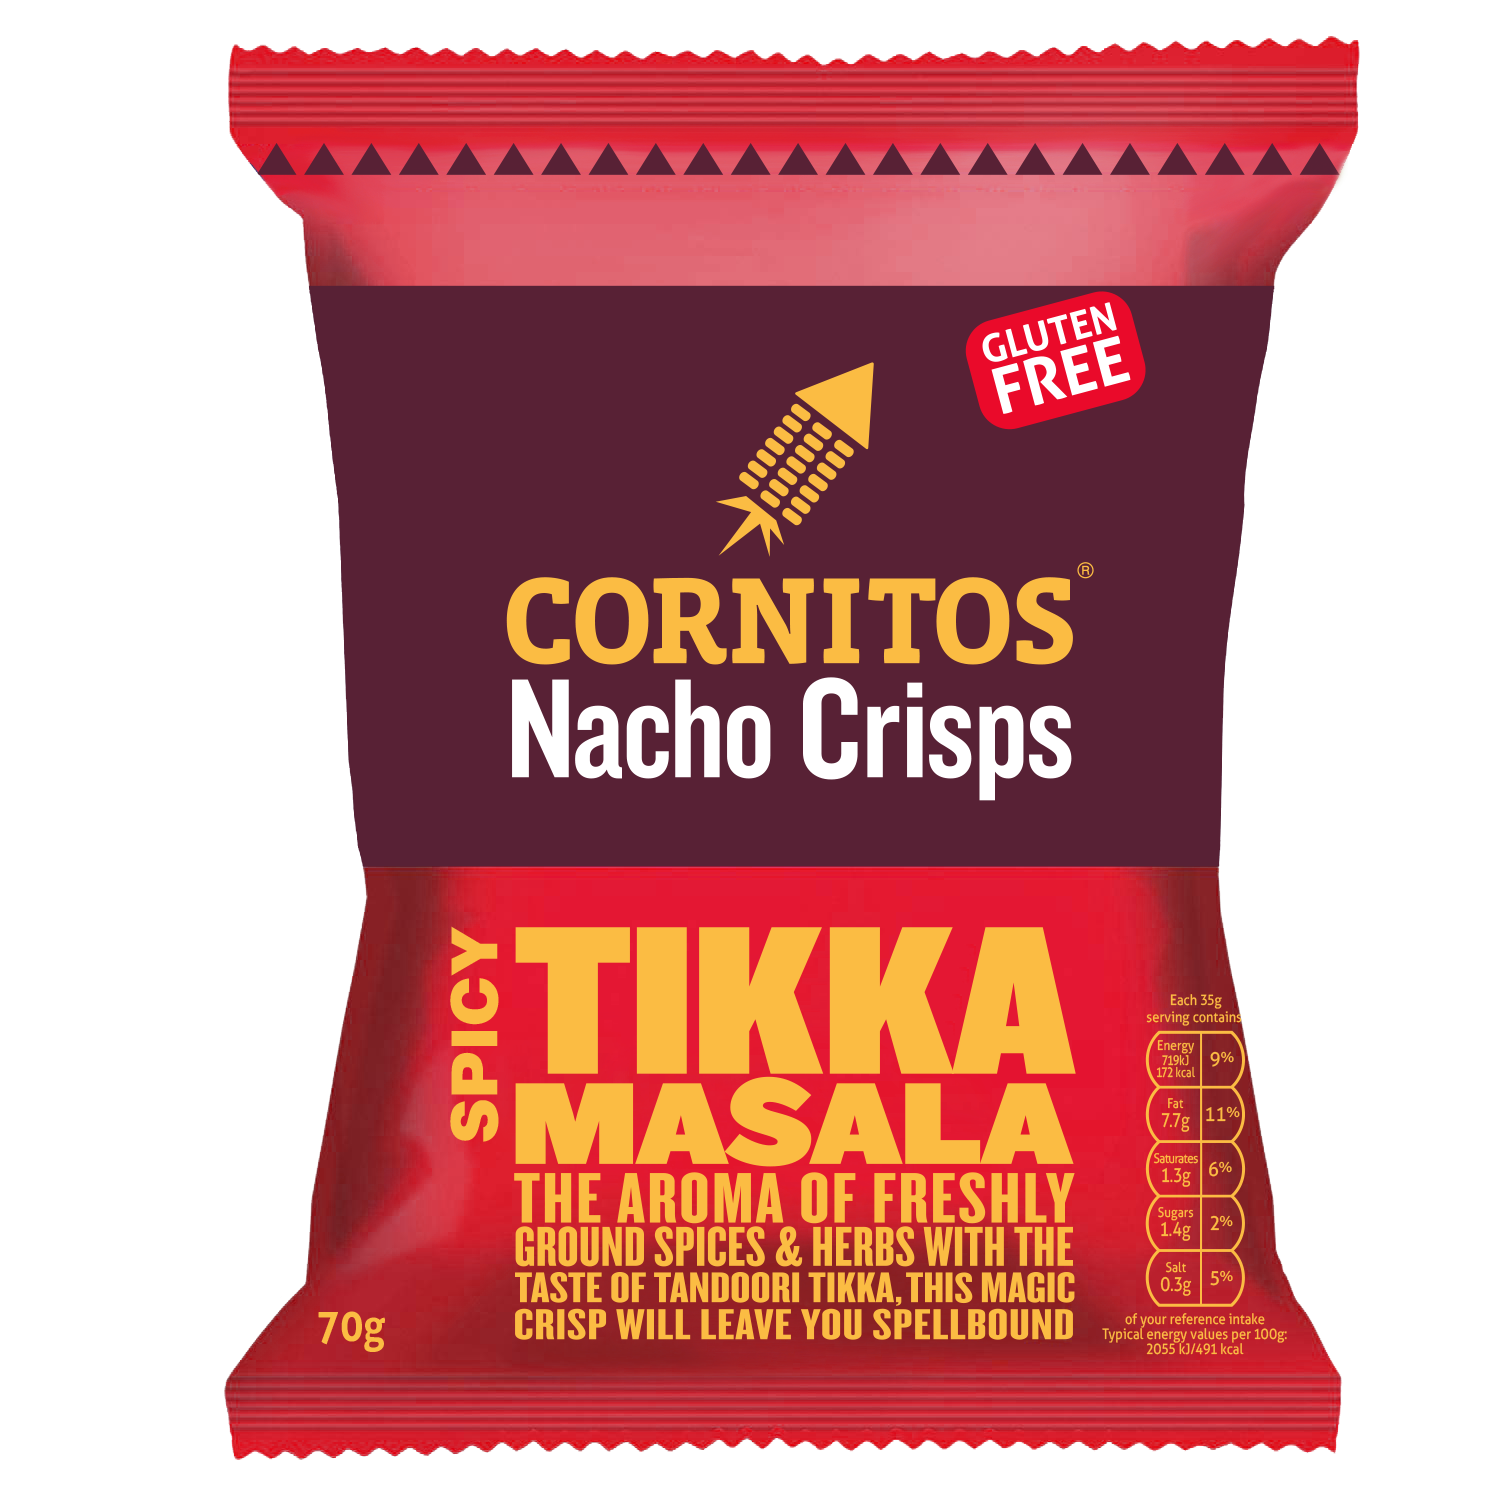 Cornitos launch exciting new flavour – Spicy Tikka Masala